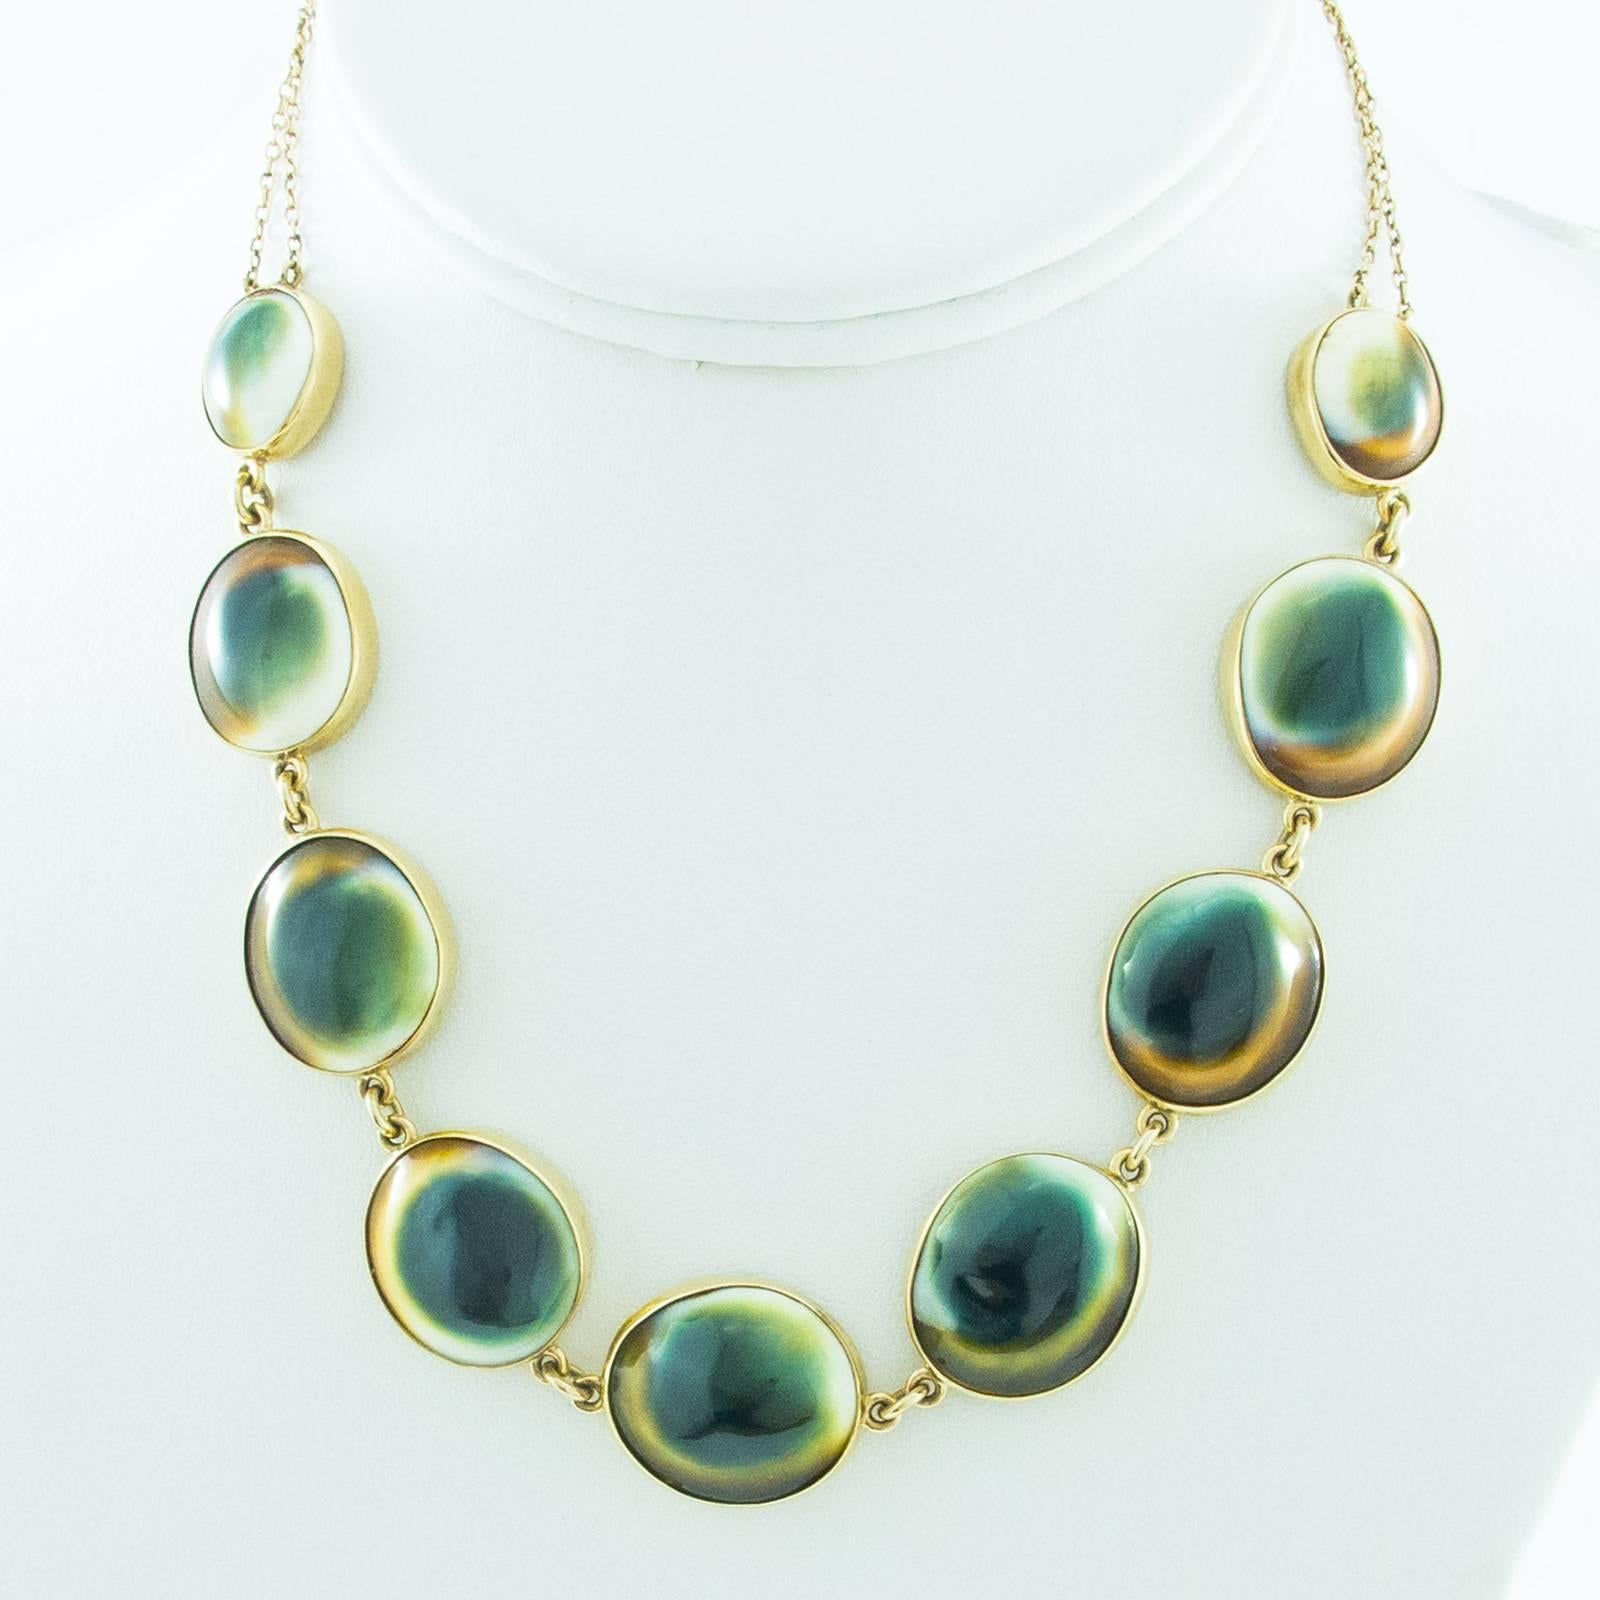 A beautiful necklace comprised of 9 large, graduating Operculum Shells collet set in 9 carat gold suspended from a matching double strand gold chain.

The shells exhibit colors of green to orange on a white ground with the centers  looking somewhat